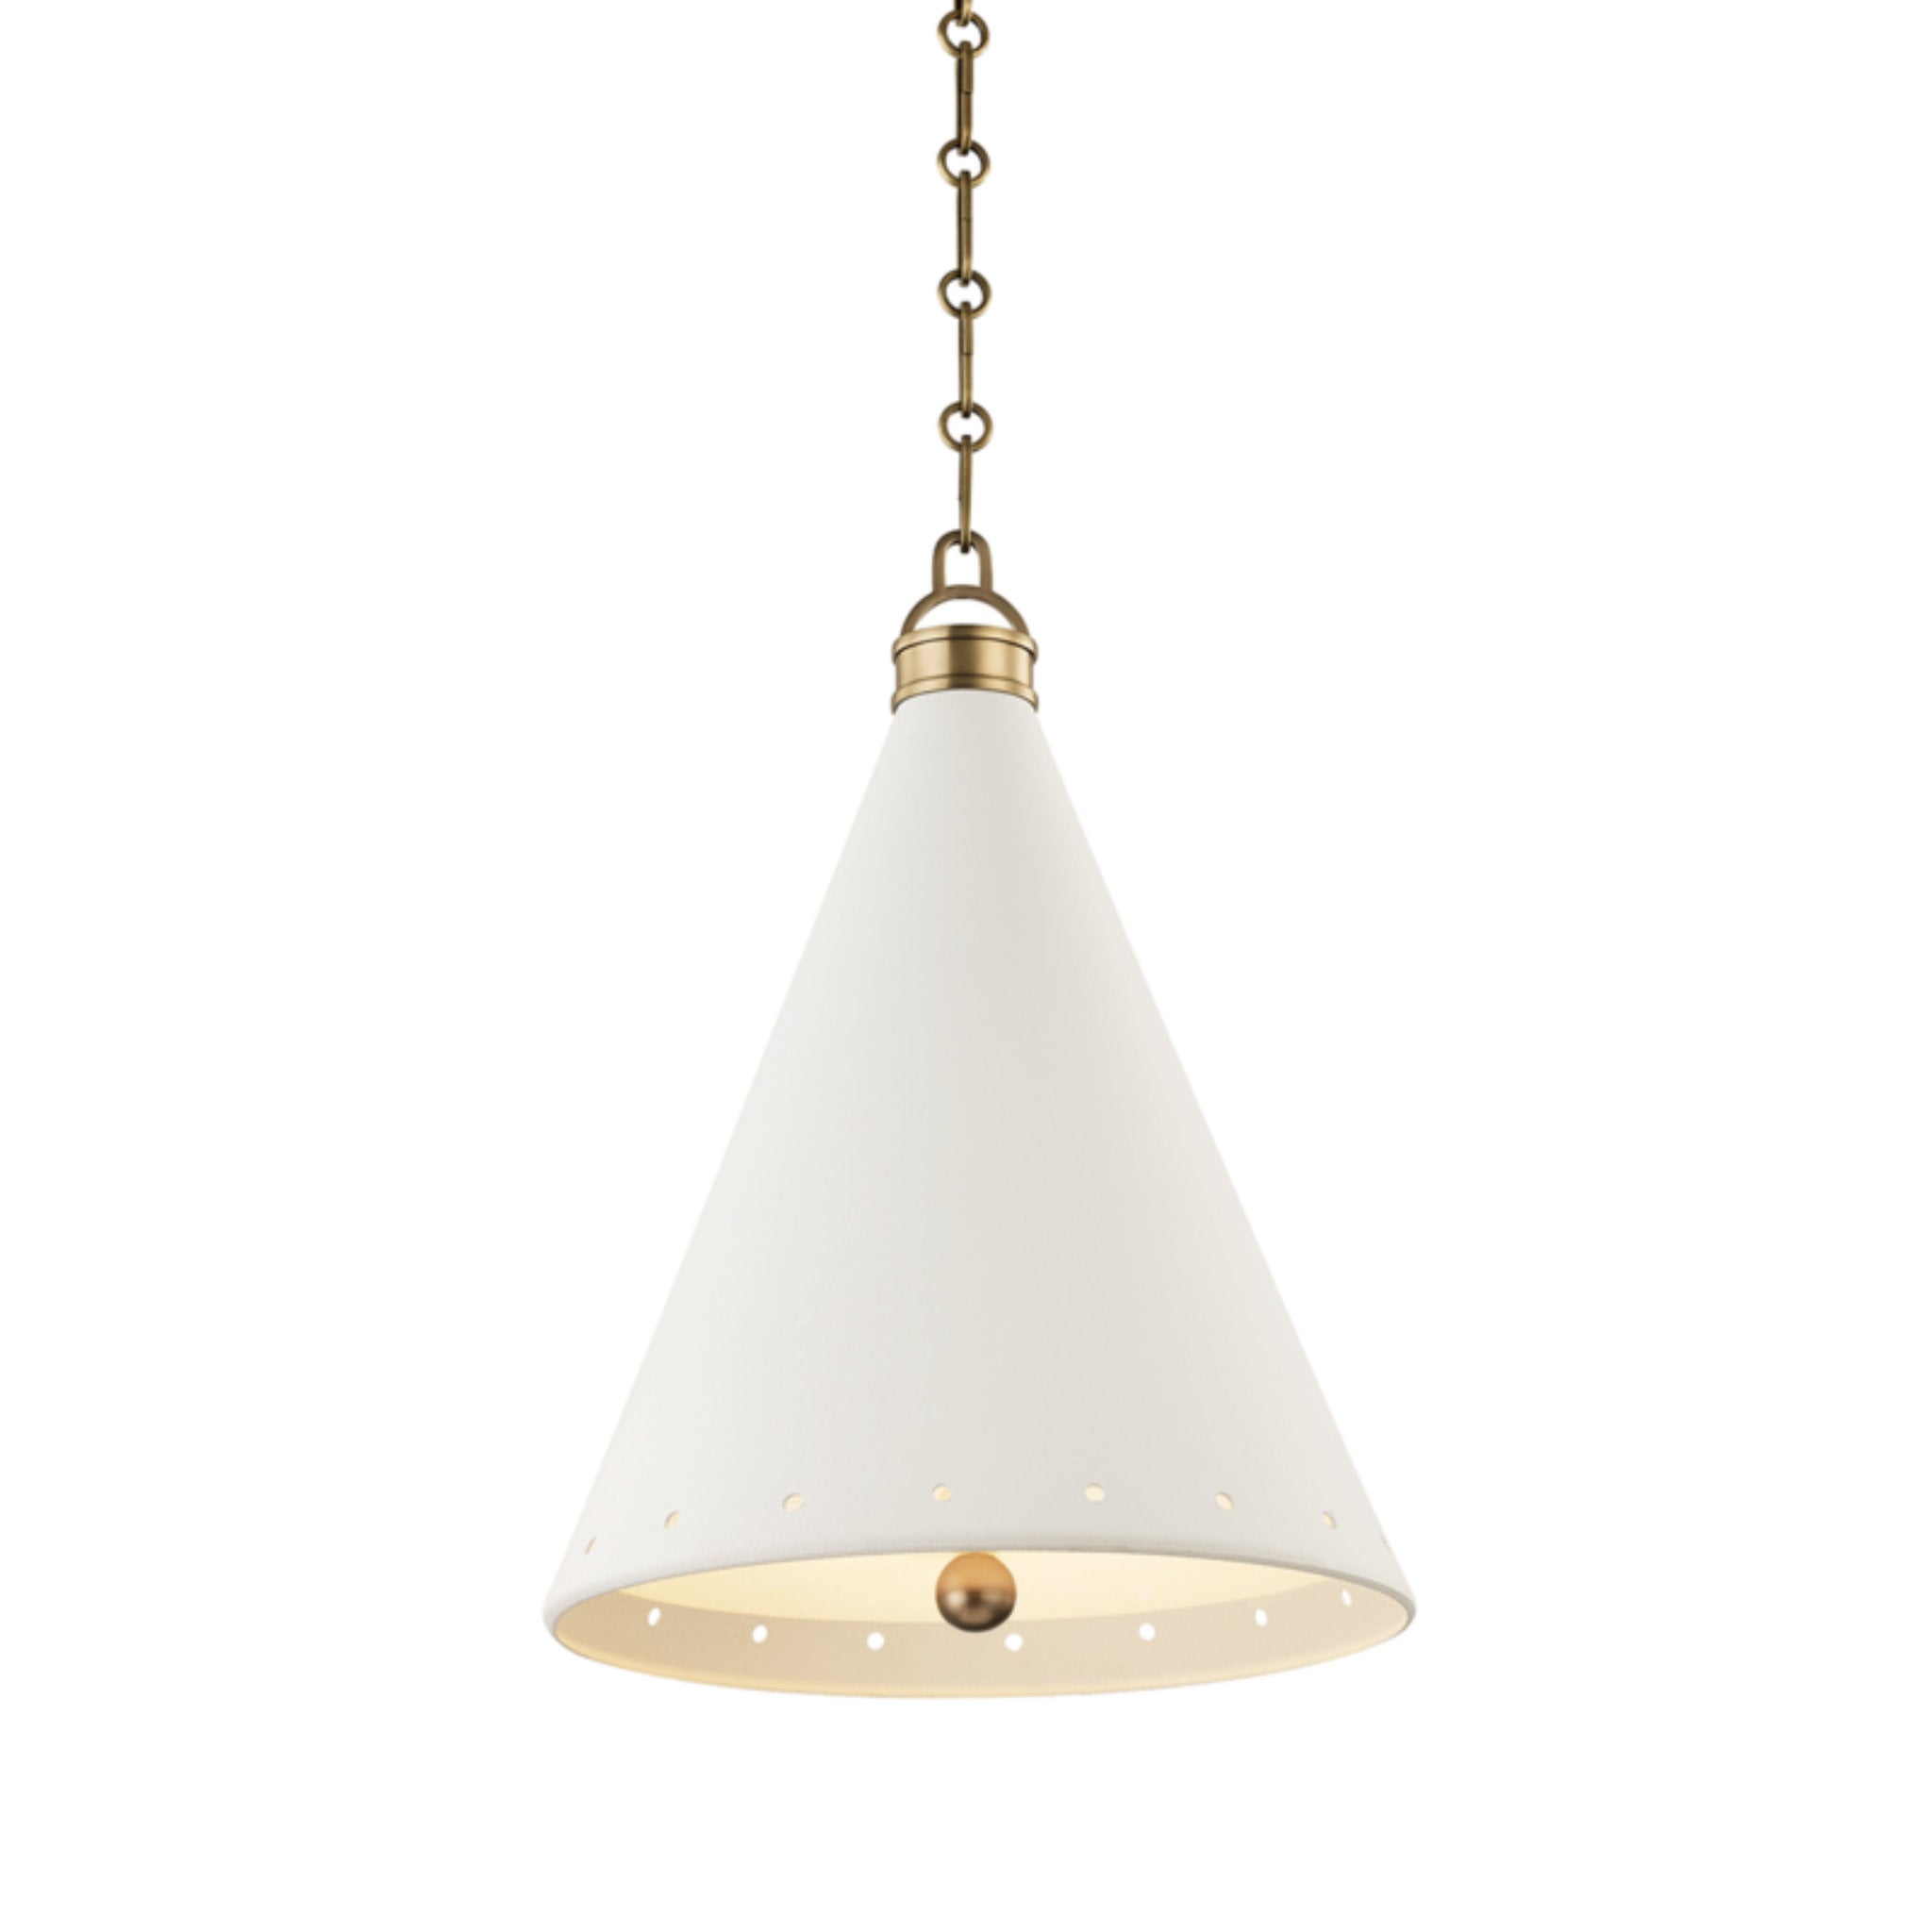 Plaster No.1 1 Light Pendant in Aged Brass/white Plaster by Mark D. Sikes